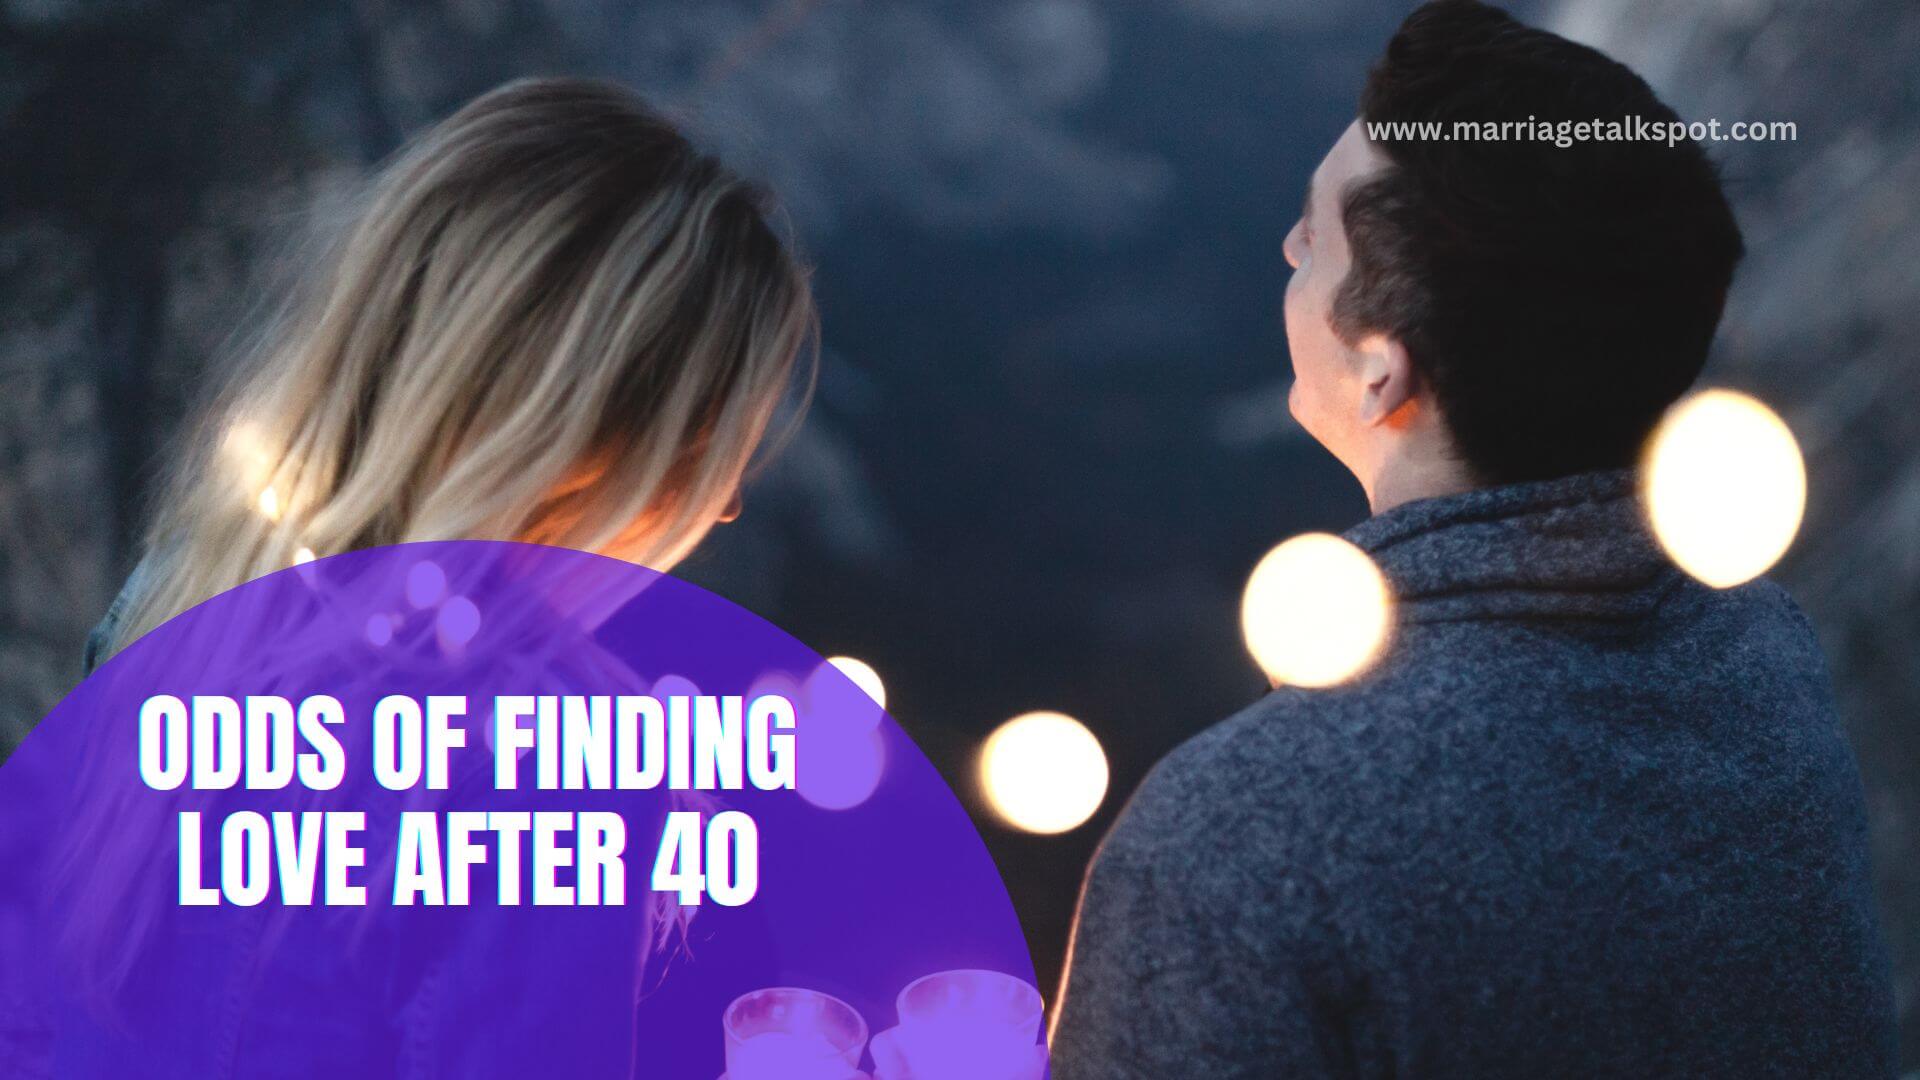 ODDS OF FINDING LOVE AFTER 40